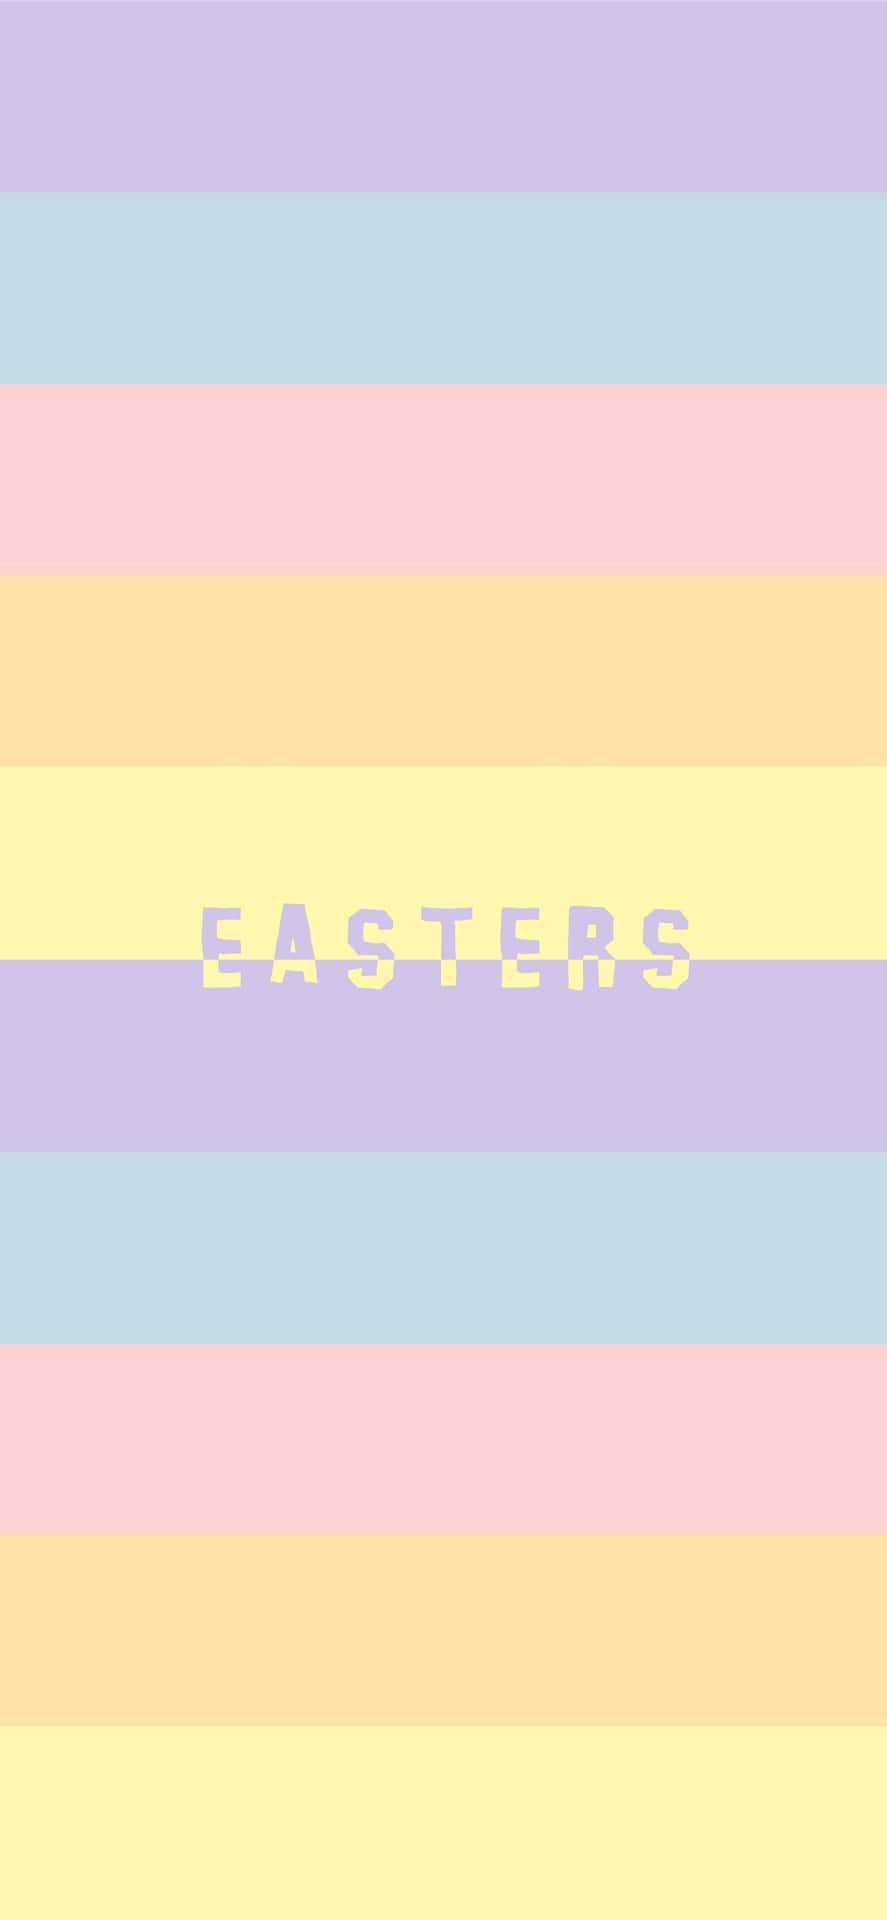 Get ready for Easter with this adorable phone background! Wallpaper